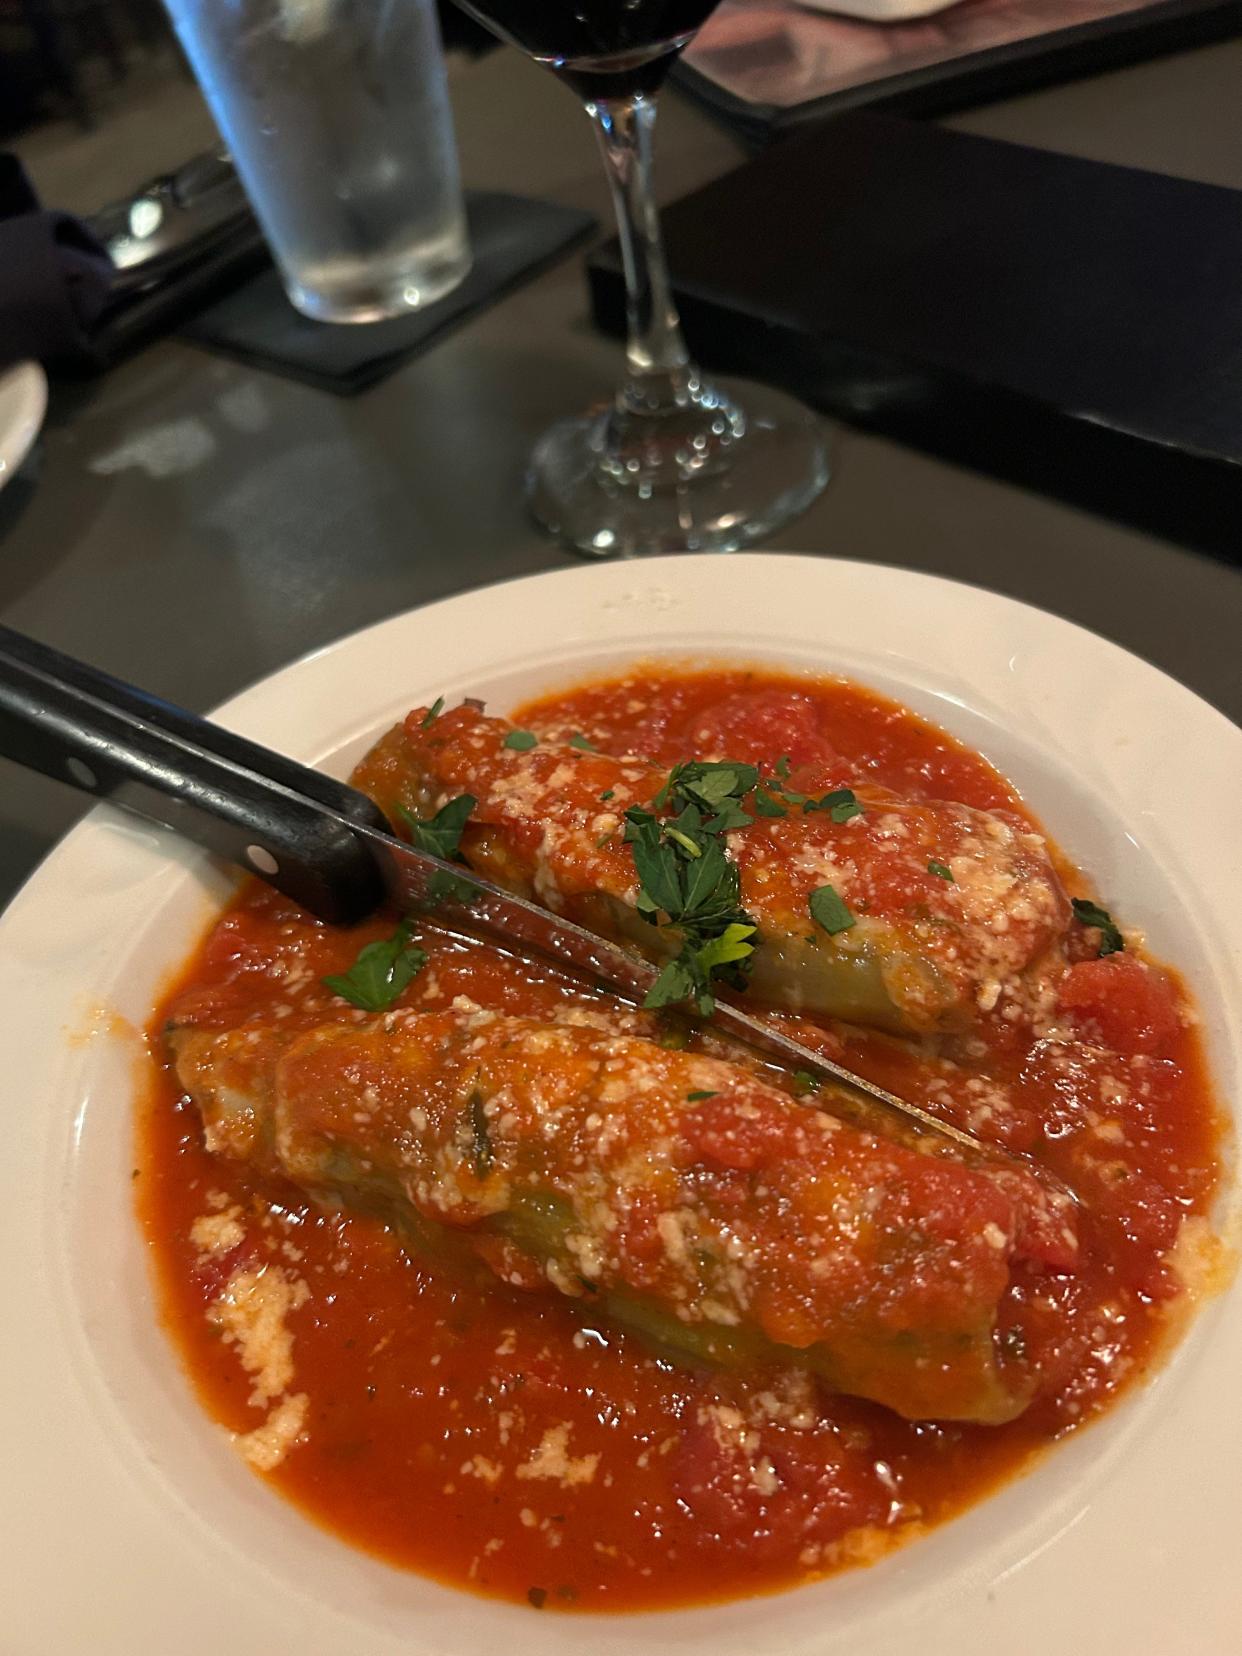 Banana peppers stuffed with Italian sausage and topped with marinara sauce and melted provolone are among eight appetizer choices at the Italian Santosuosso's restaurant in Medina Township.